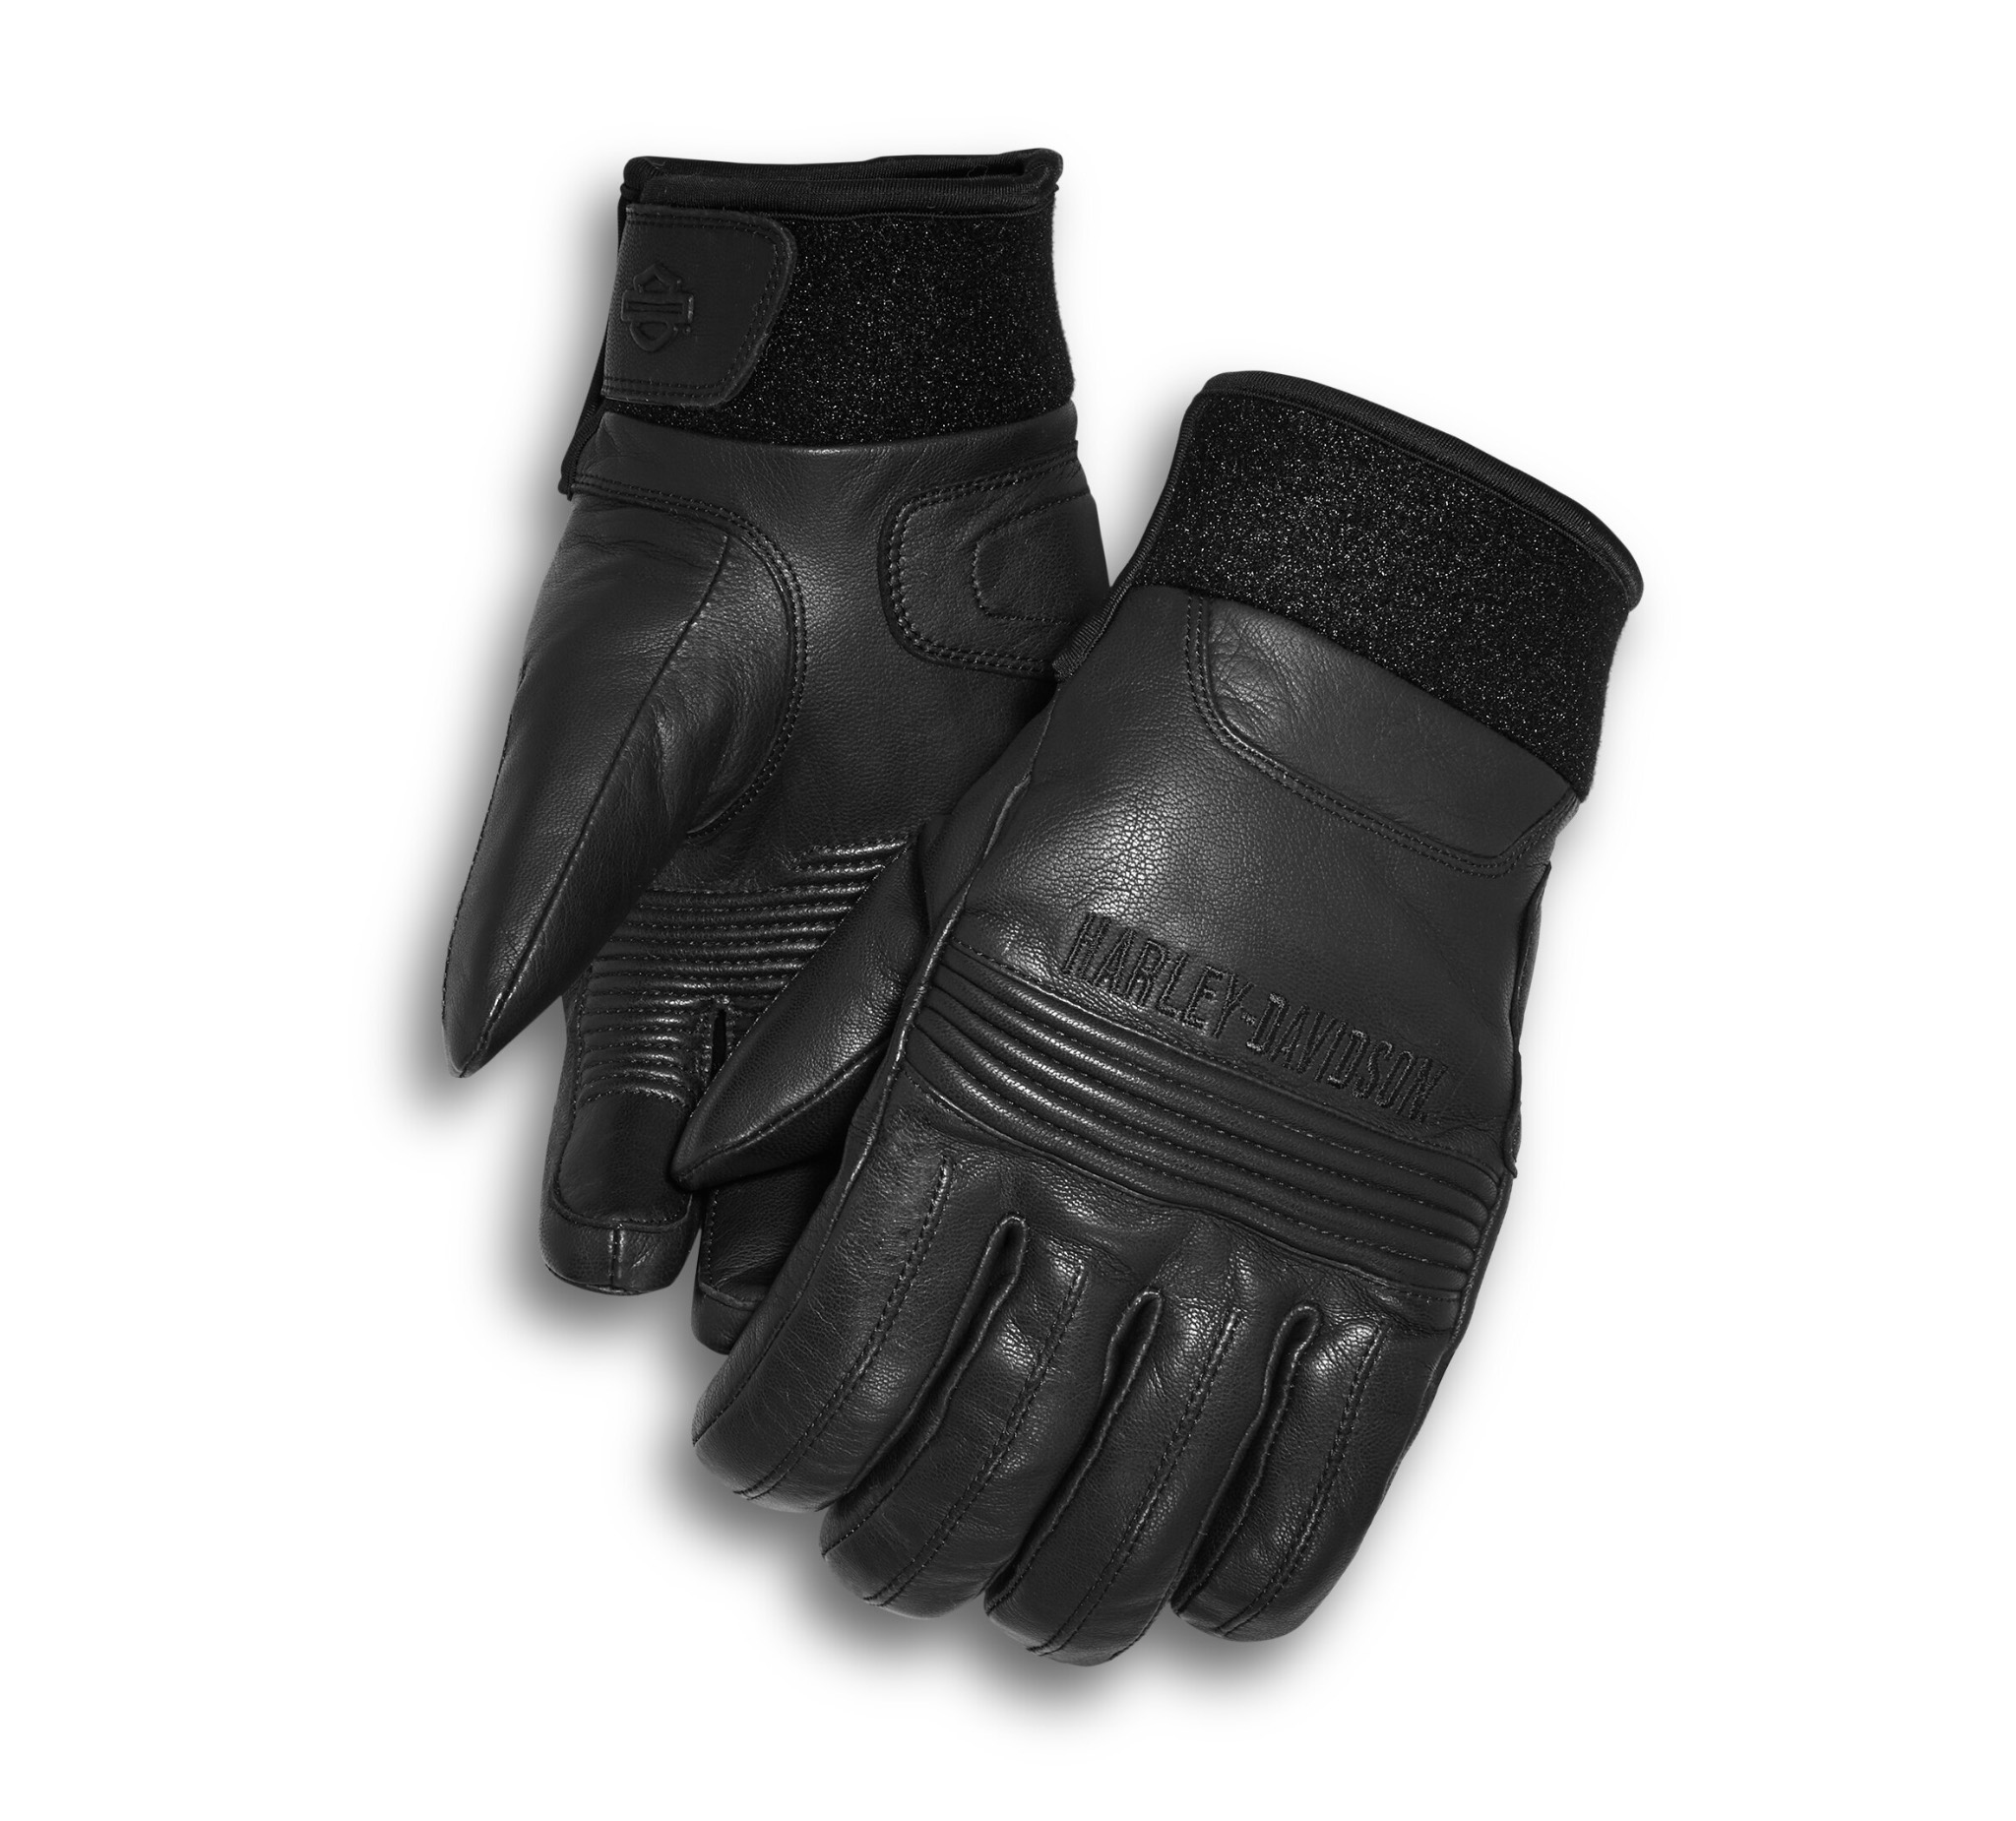 L PADDED LEATHER GLOVES Fingers MOTORCYCLE waterproof thermal knob